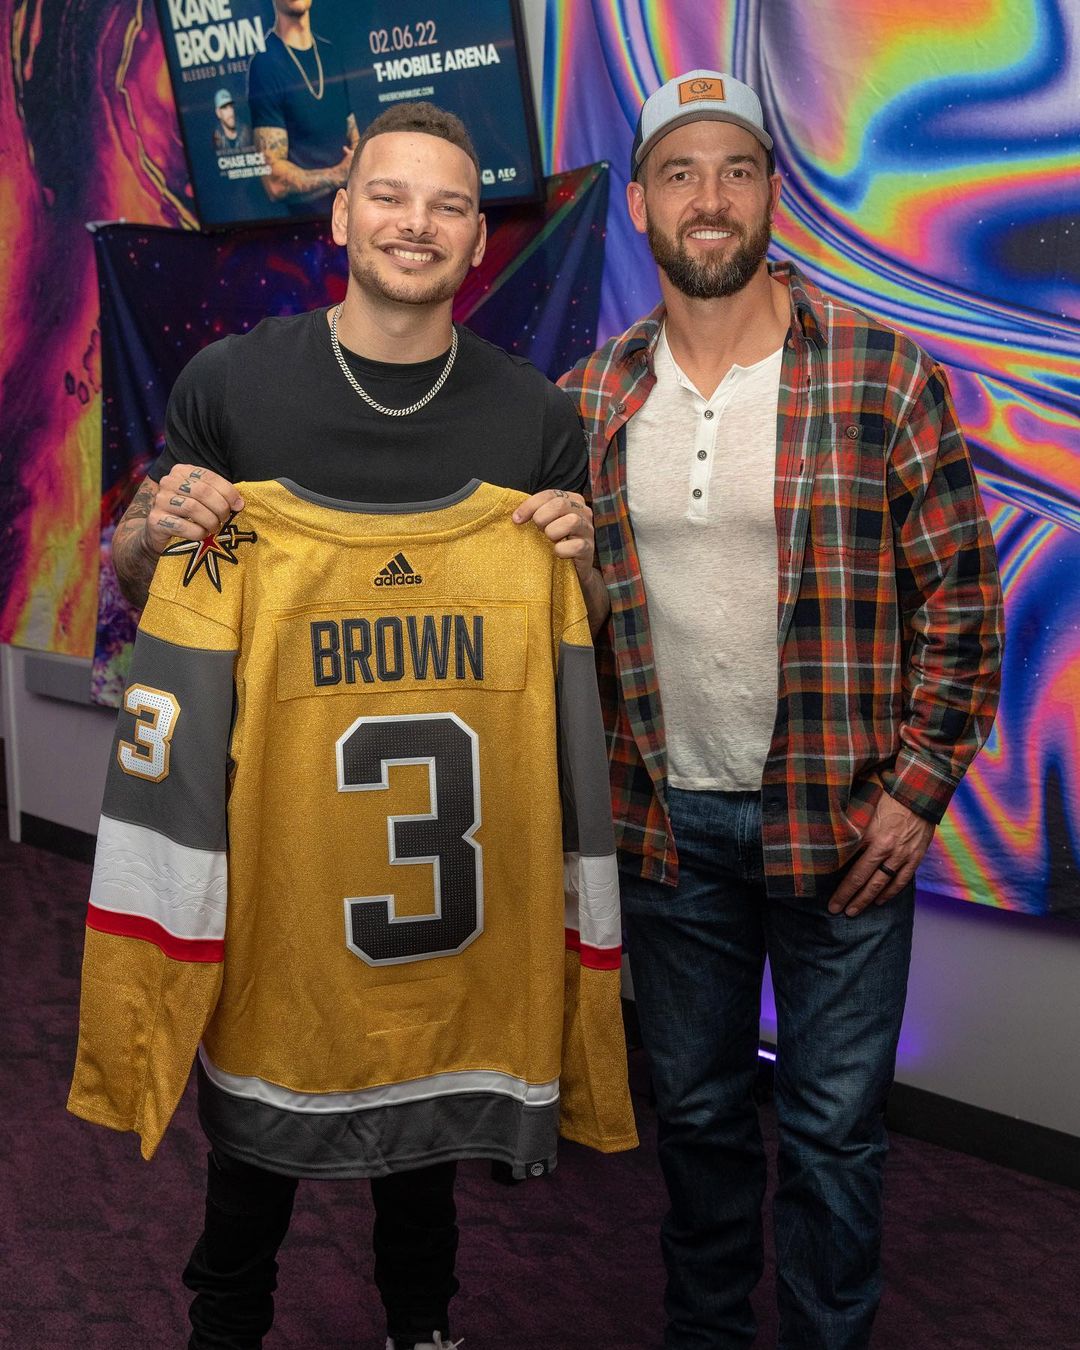 You look good in gold @kanebrown_music ...